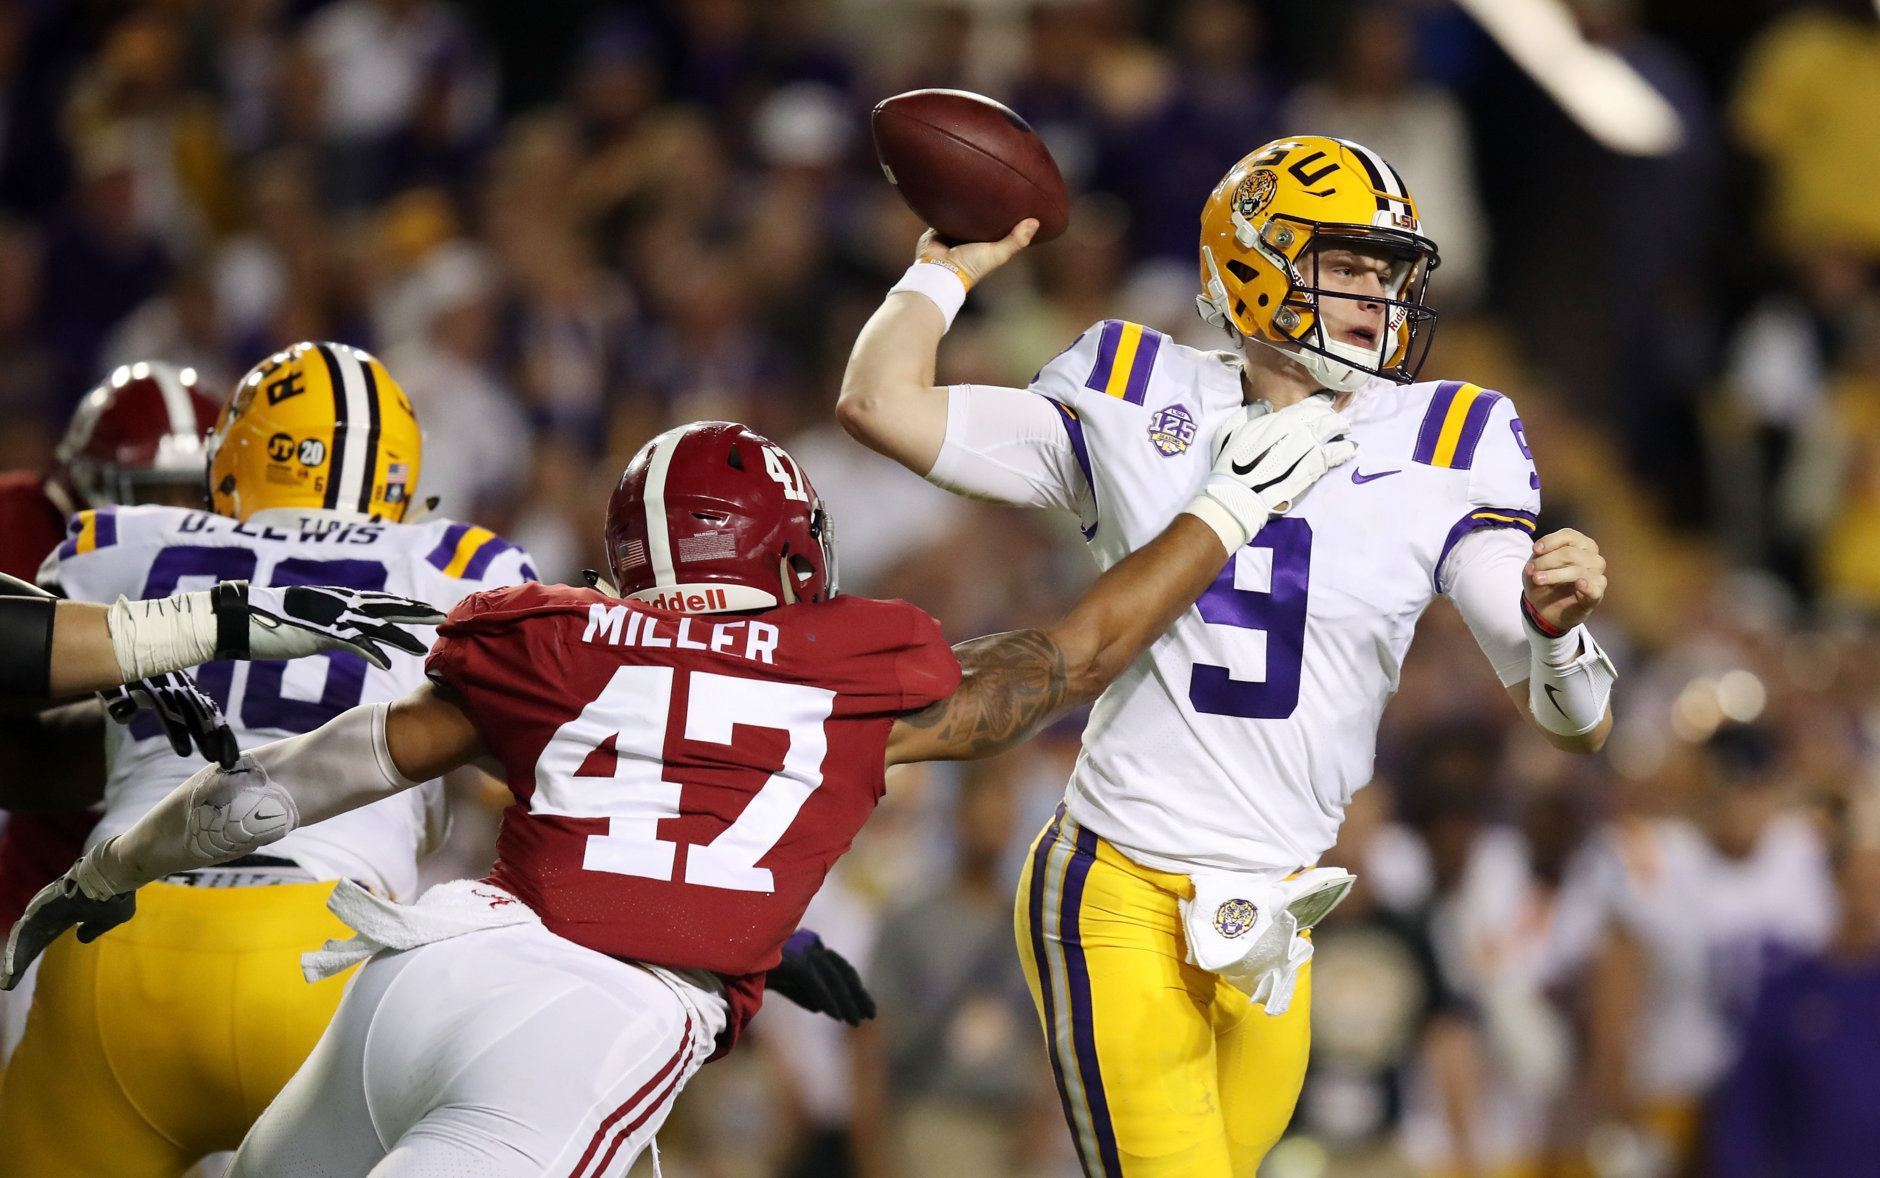 BATON ROUGE, LOUISIANA - NOVEMBER 03: Christian Miller #47 of the Alabama Crimson Tide attempts to sack Joe Burrow #9 of the LSU Tigers in the second quarter of their game at Tiger Stadium on November 03, 2018 in Baton Rouge, Louisiana. (Photo by Gregory Shamus/Getty Images)